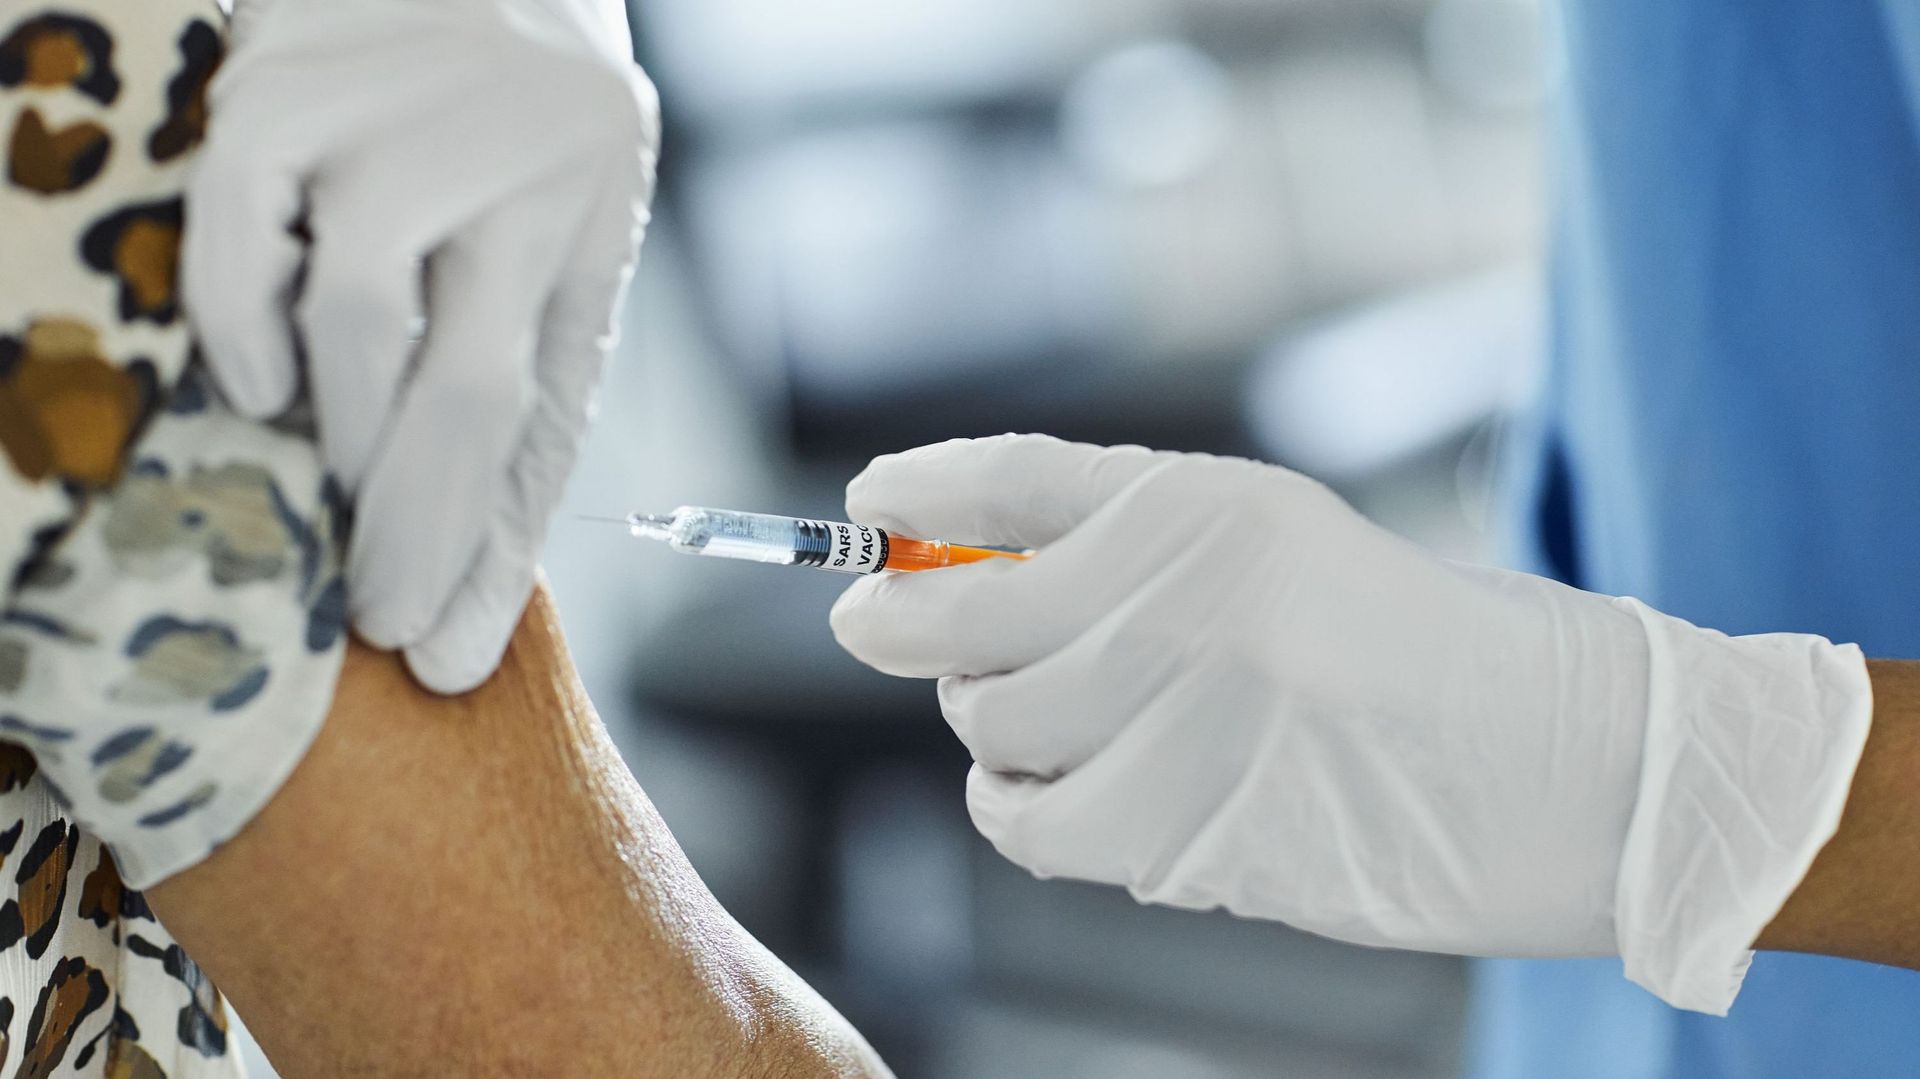 Spanish Hospital Administers Some Of The Country&#39;s First Covid-19 Vaccination Shots